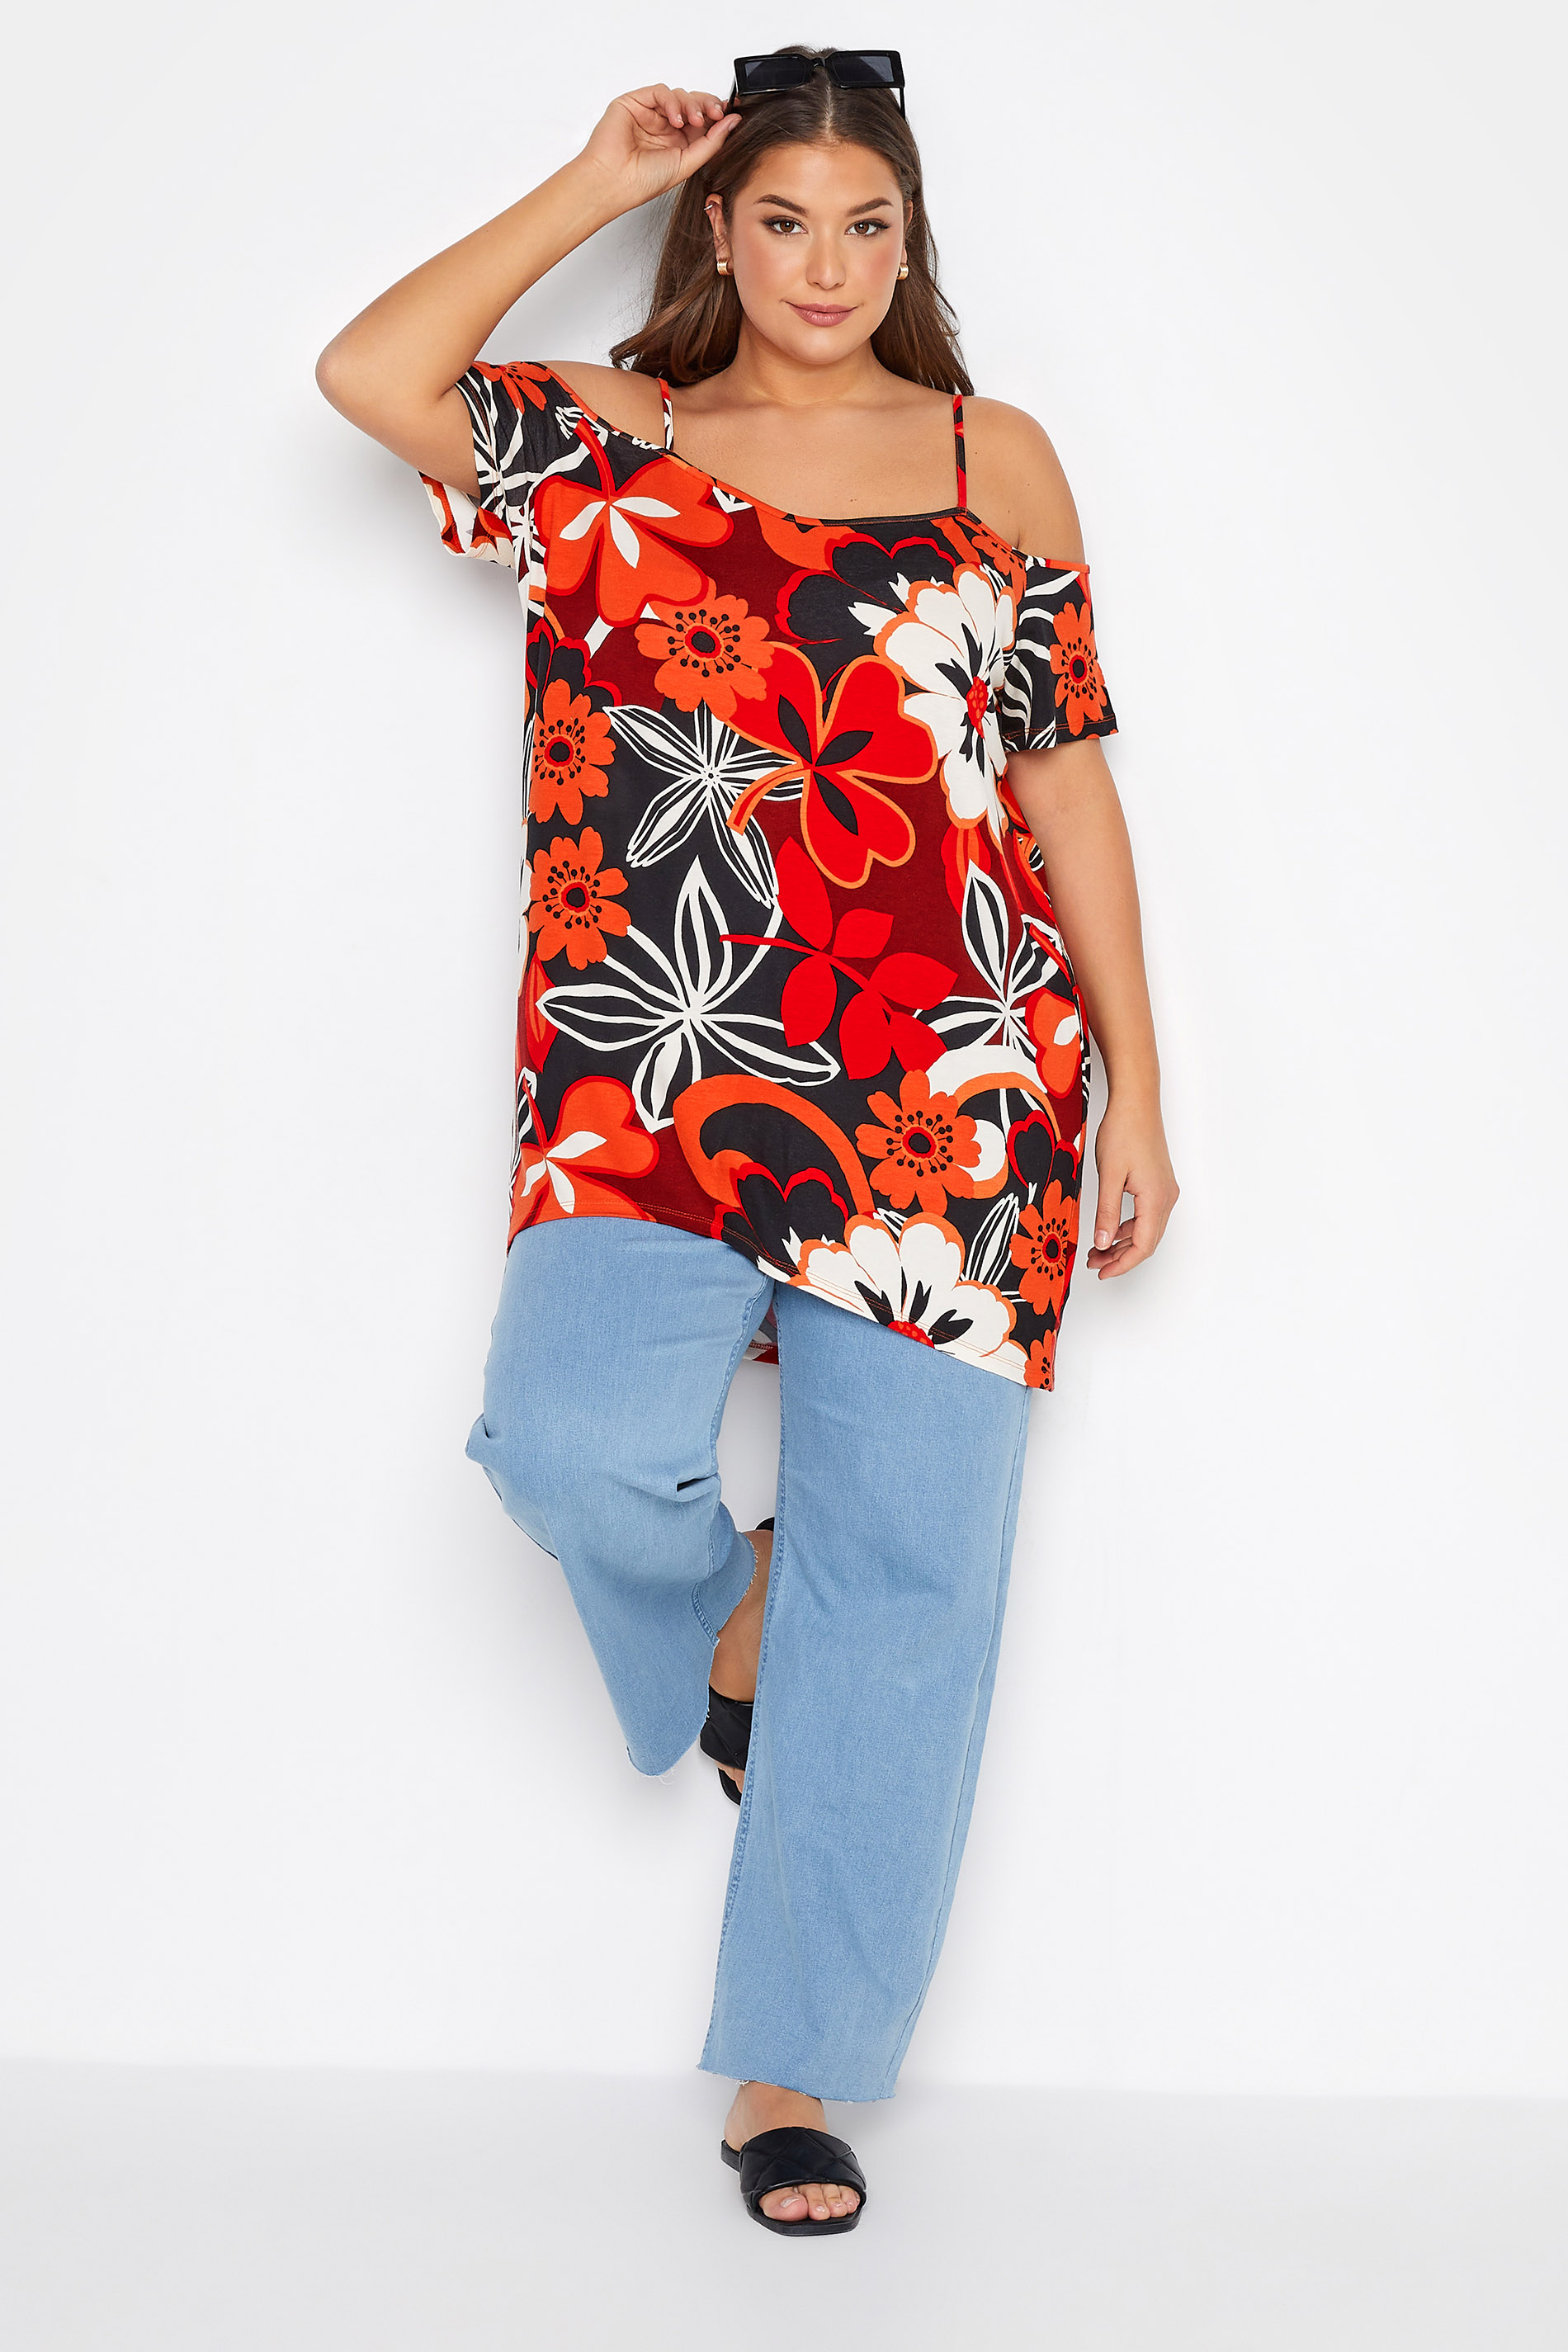 Grande taille  Tops Grande taille  Tops Épaules Ajourées & Style Bardot | Top Rouge Tropical Floral Style Bardot - GS88409